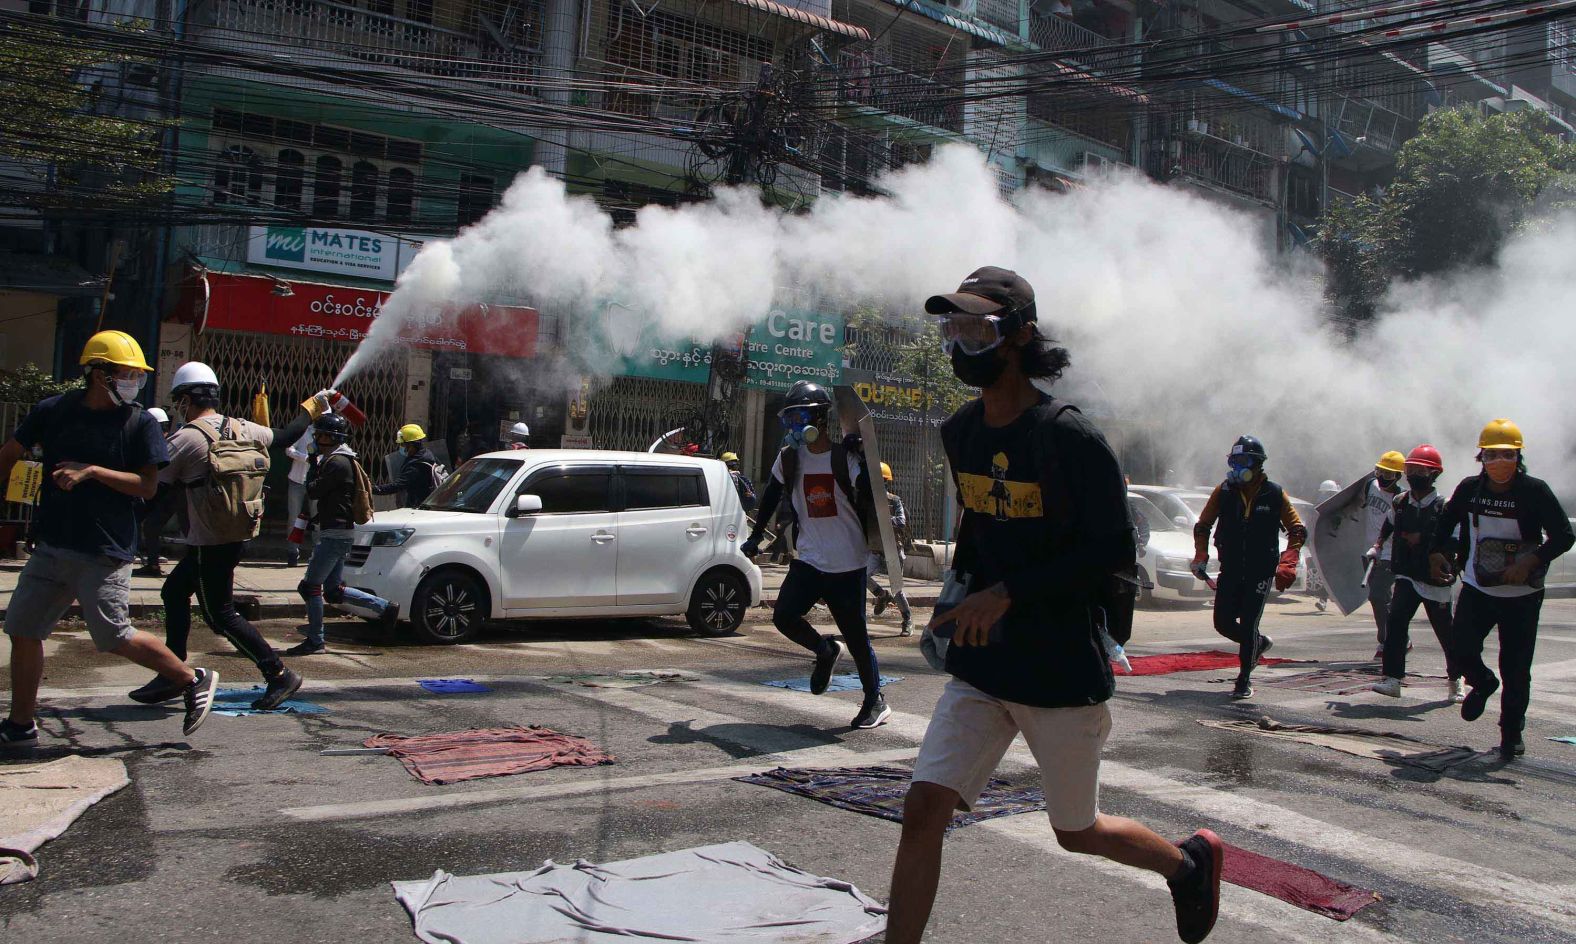 A protester discharges a fire extinguisher to counter the impact of tear gas that was fired by police in Yangon on March 8.